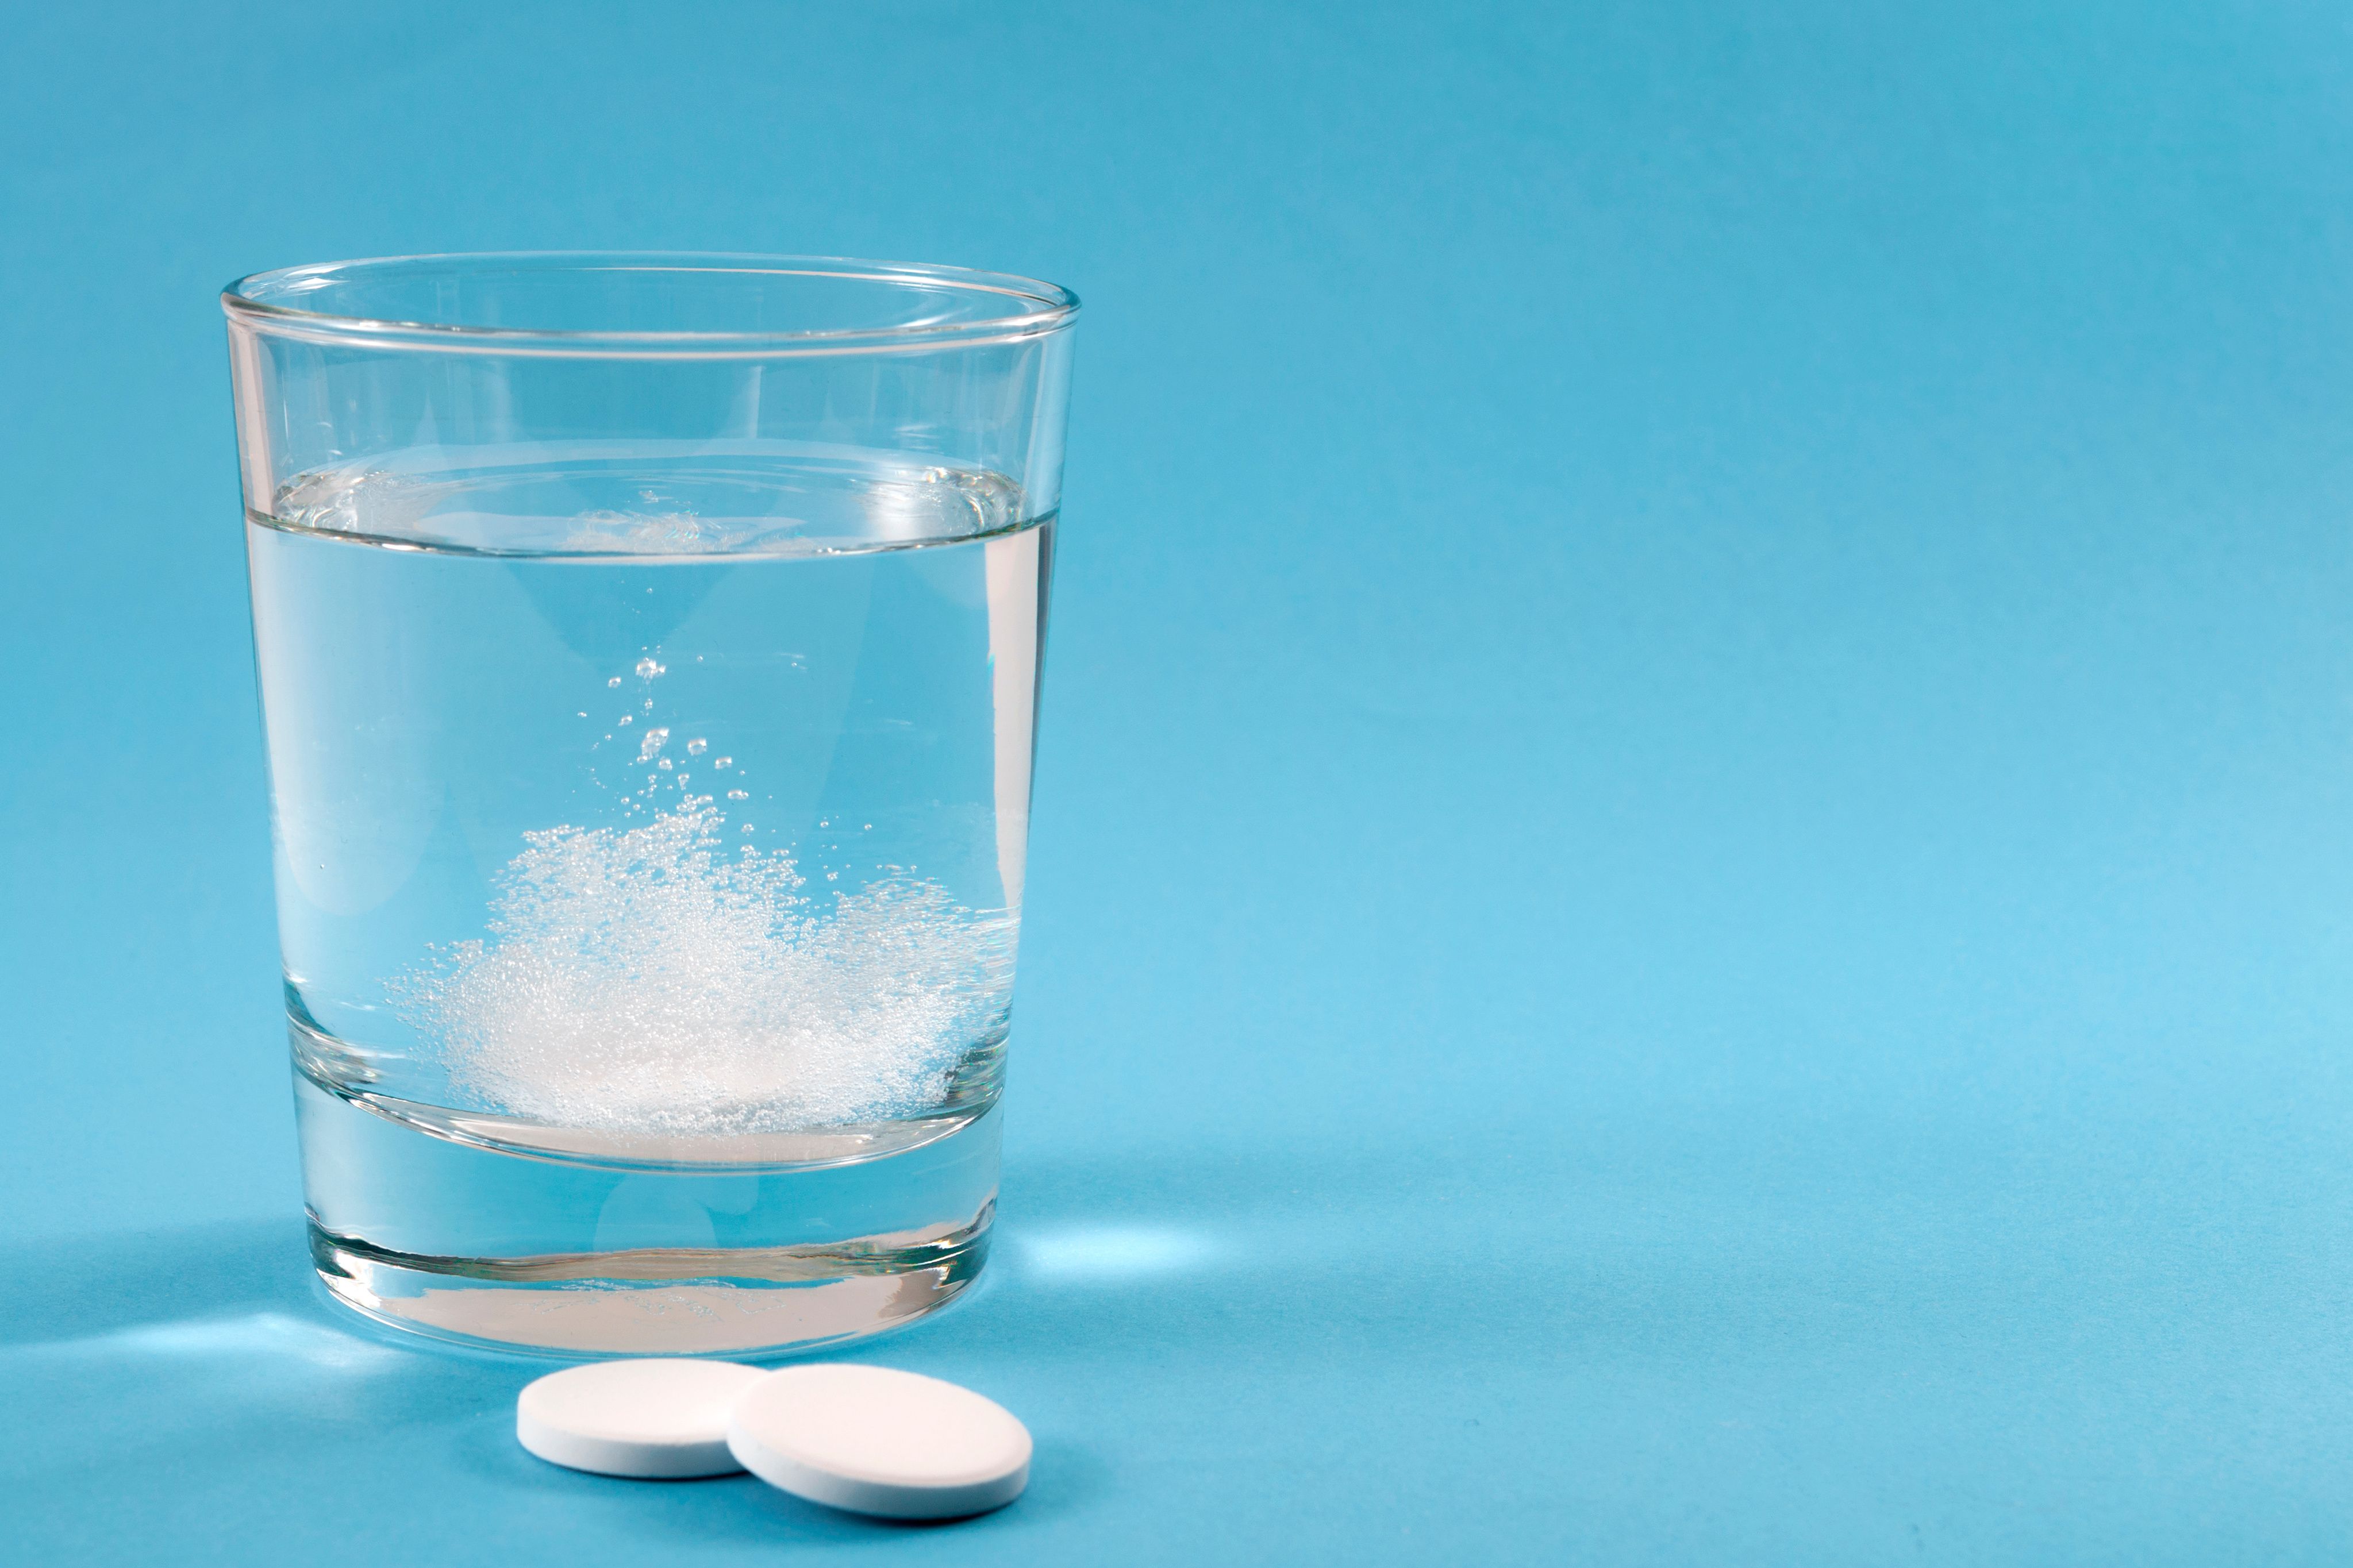 Aspirin tablets dissolving in water | Imaged credit: Victor Moussa - stock.adobe.com